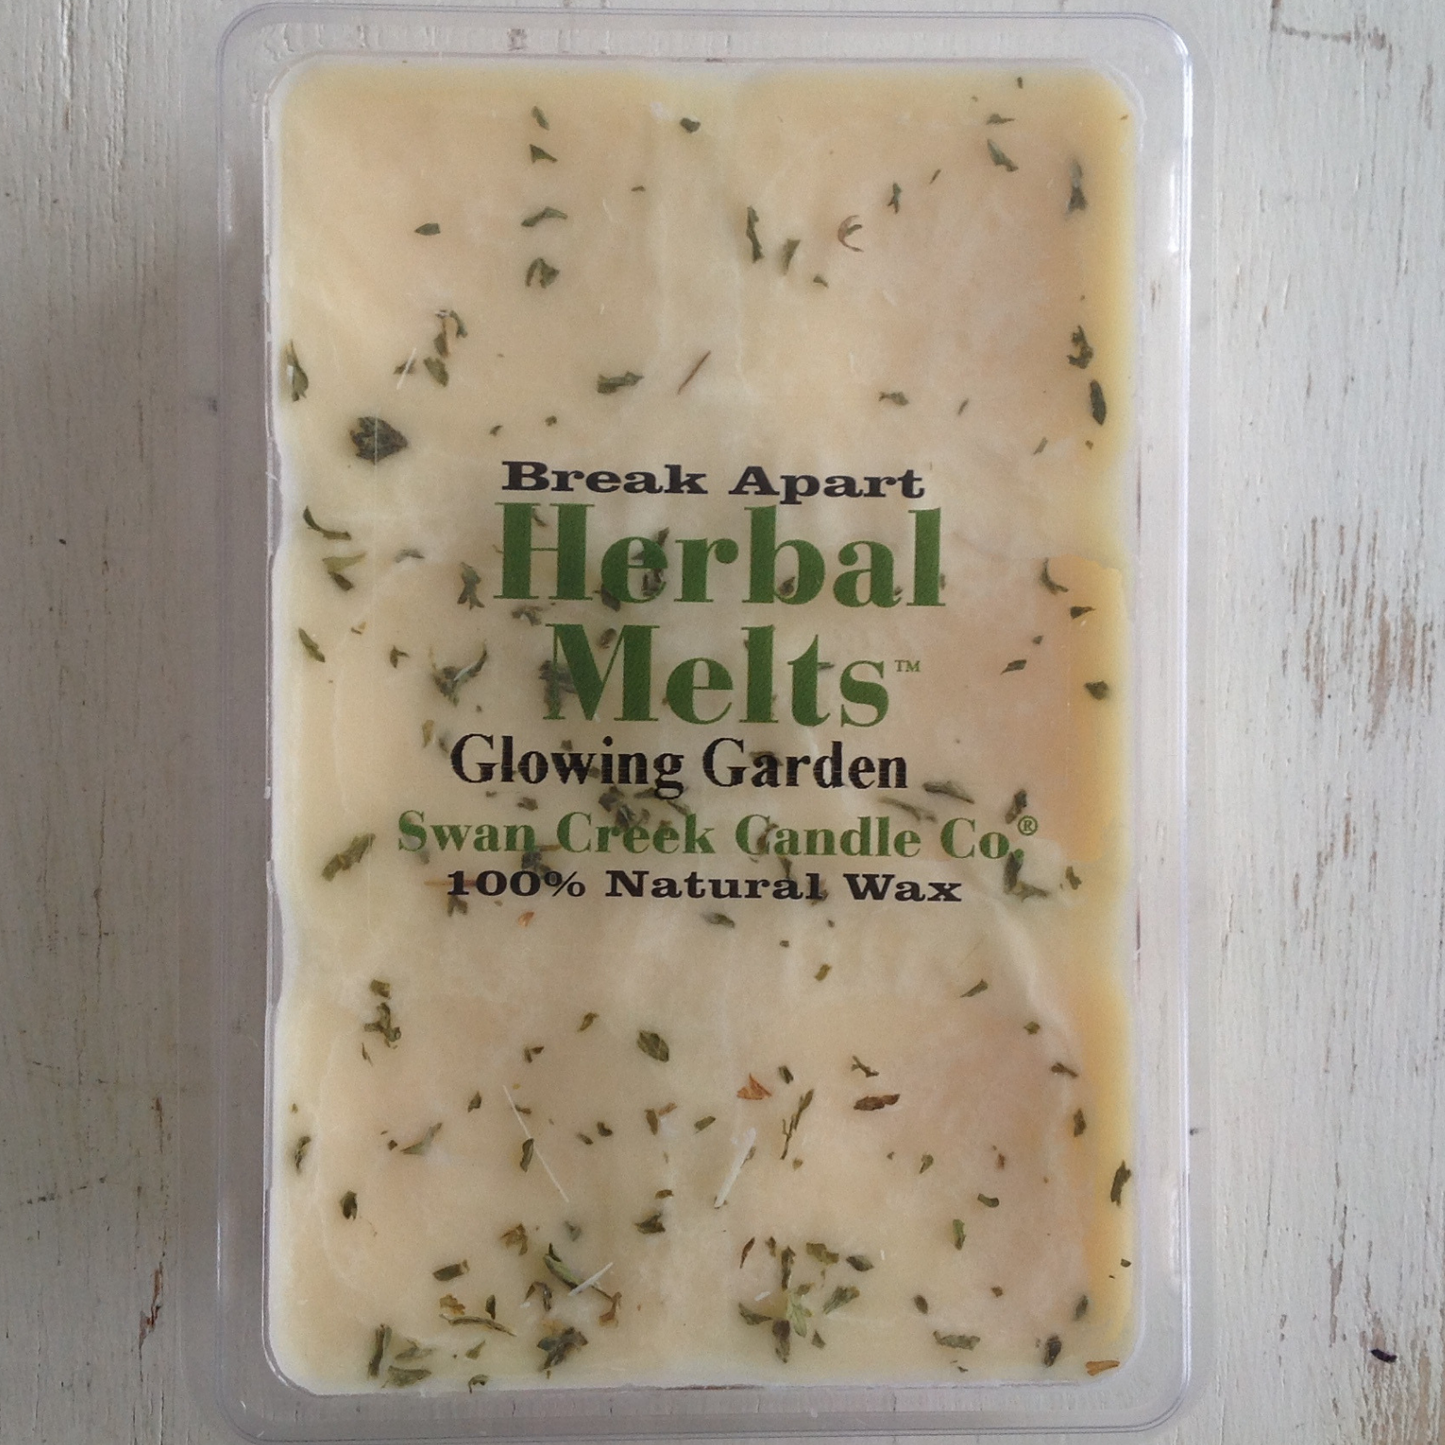 Swan Creek Candle Company Herbal Drizzle Wax Melts Glowing Garden